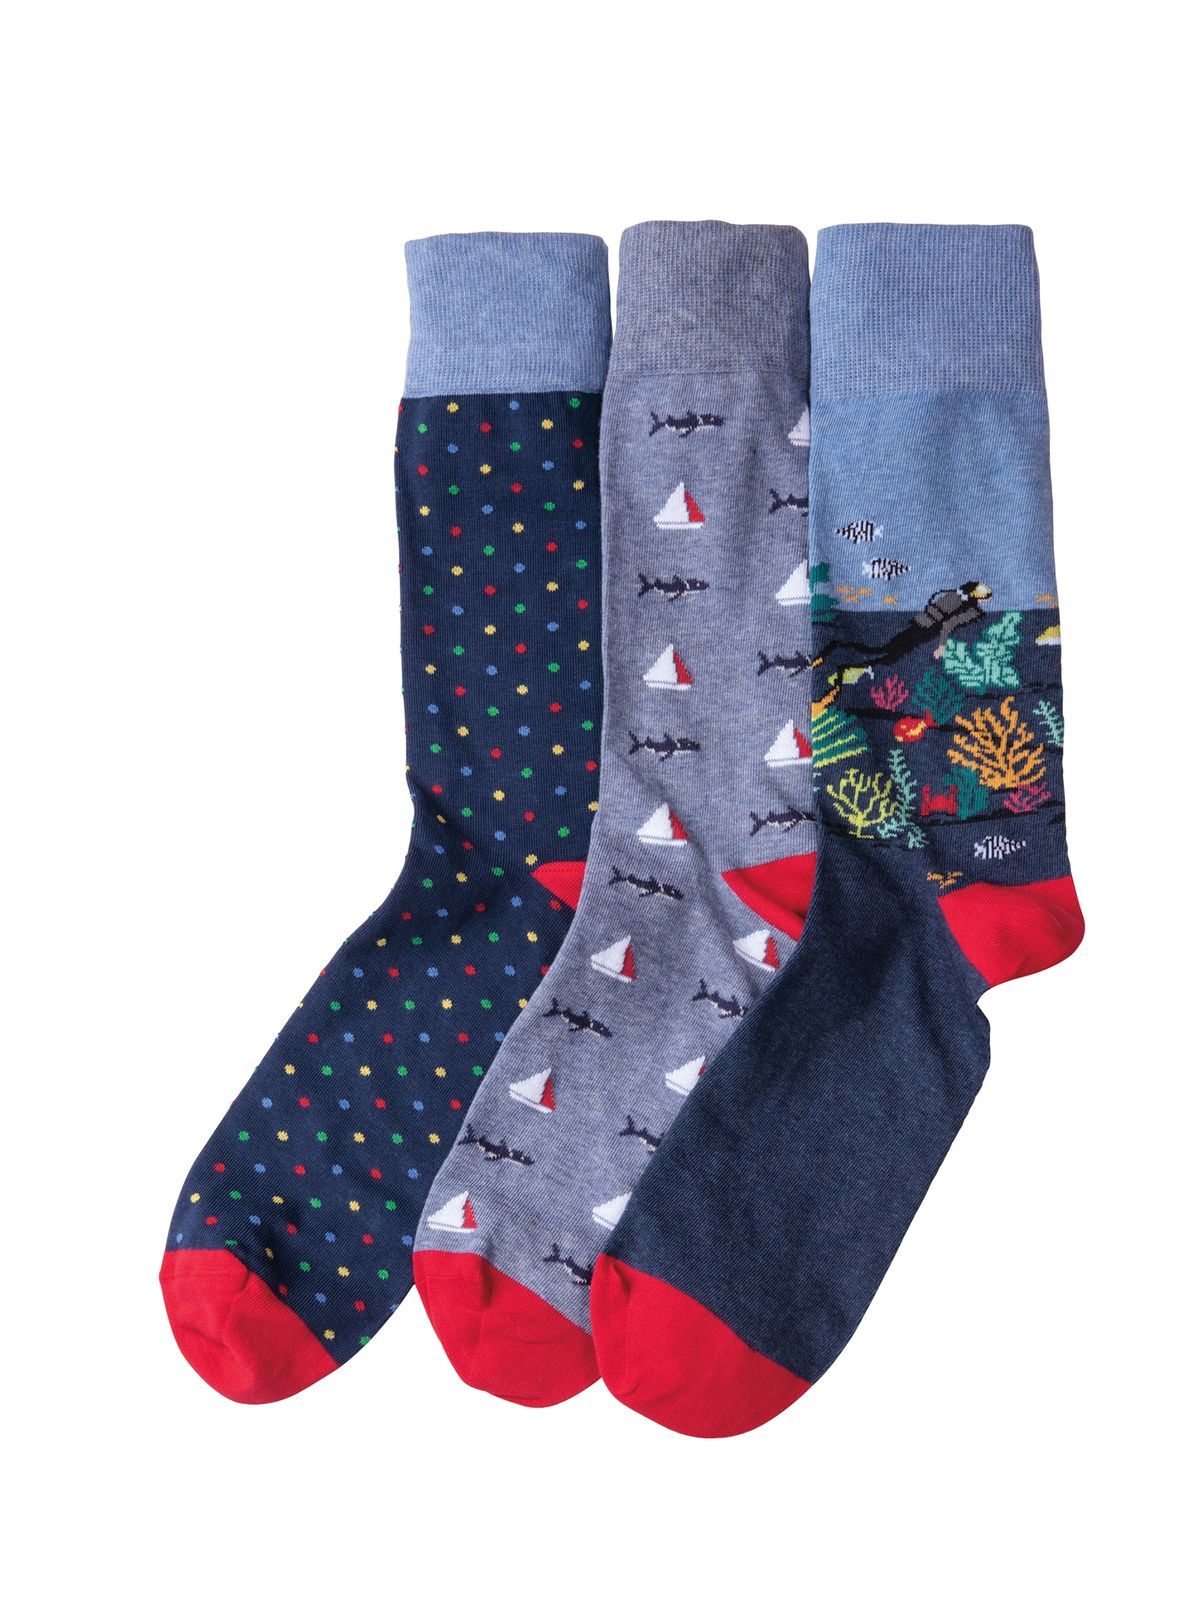 Navy/Red 39-42 Cardiff Socks by HKM Pack of 3 Pairs Extremely Popular 